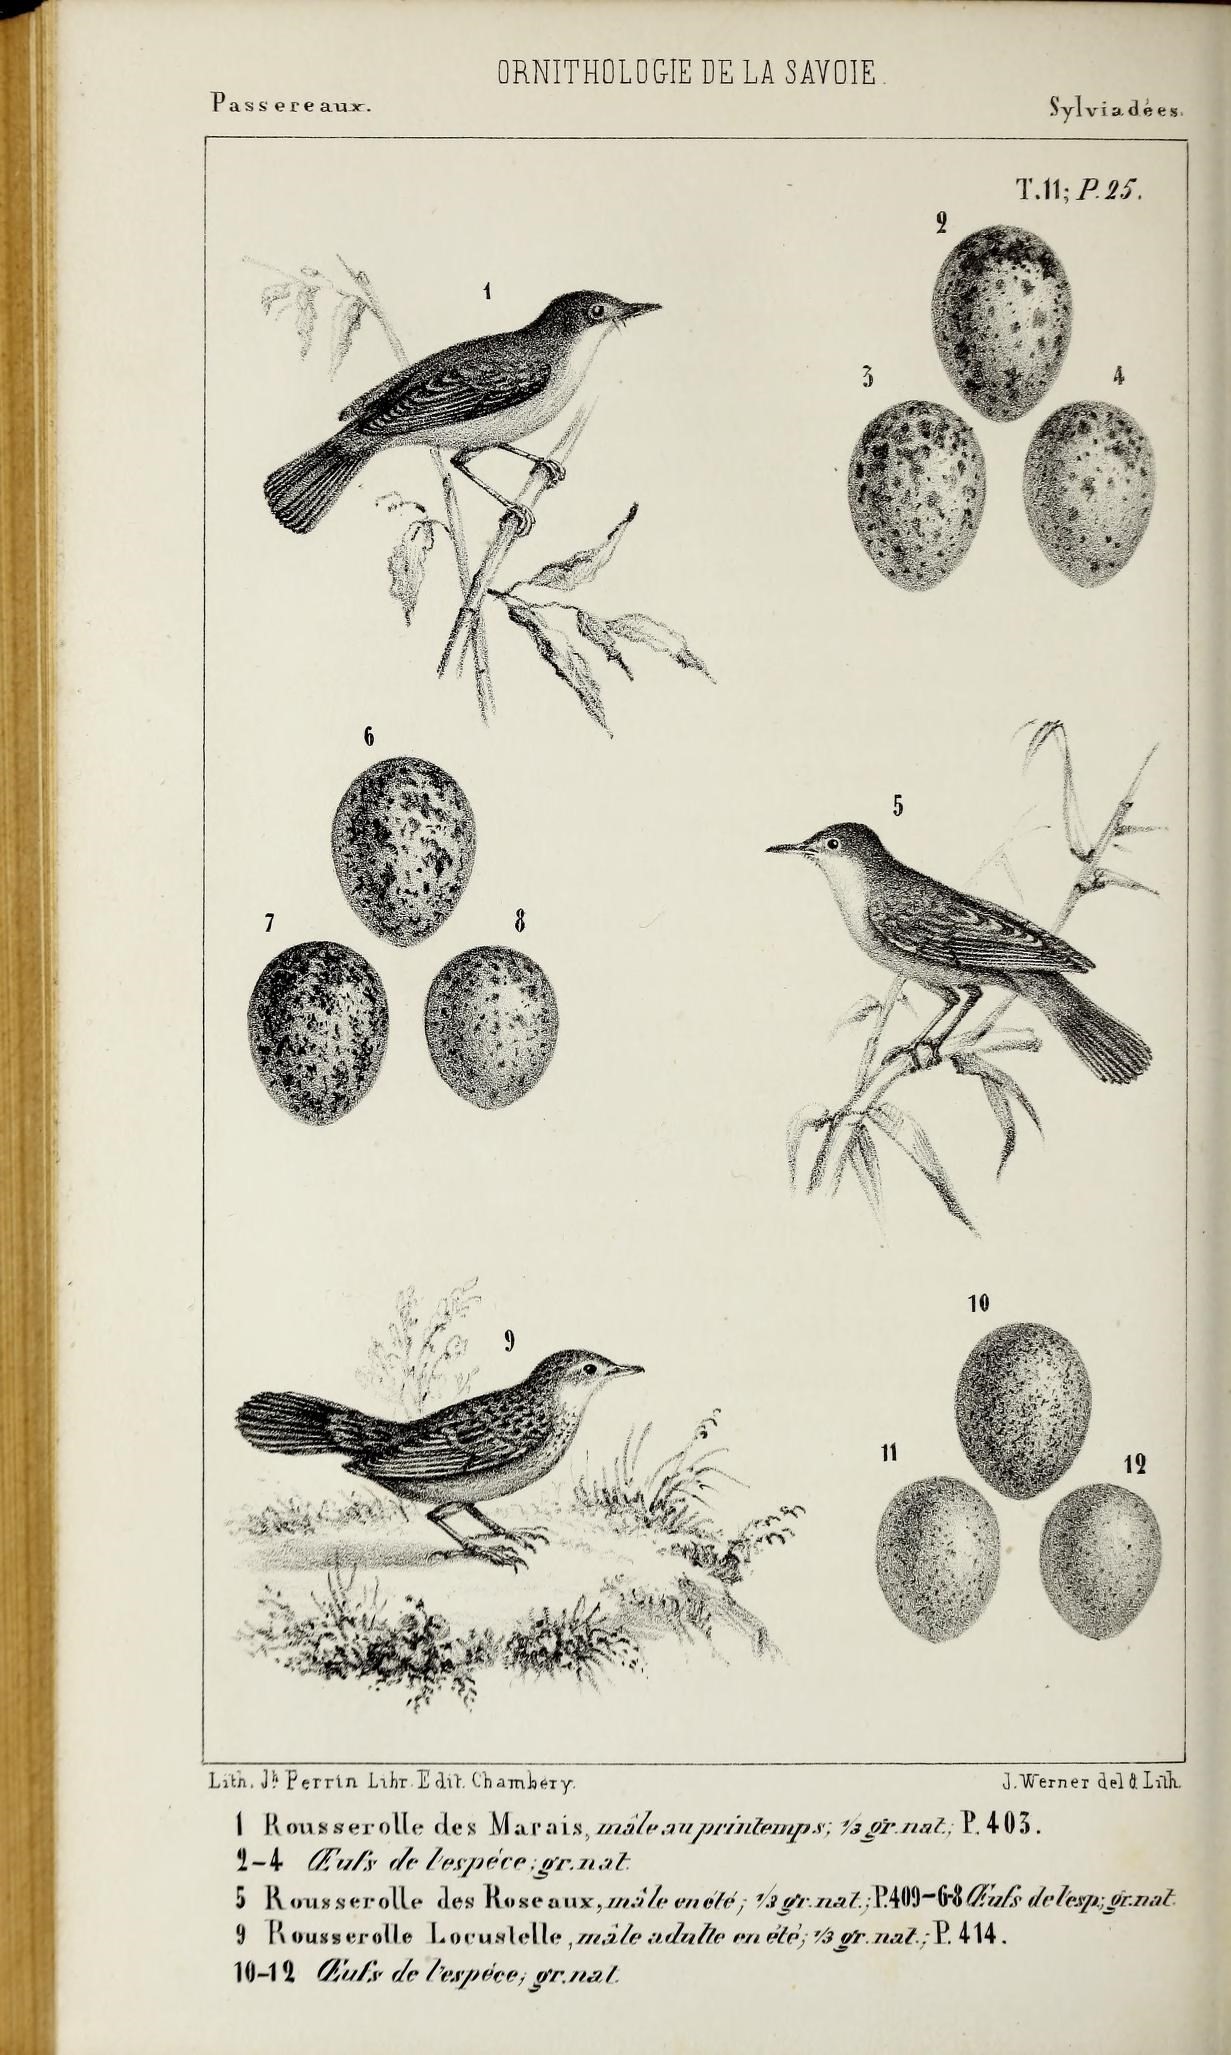 several birds are standing on nches with fruit on them